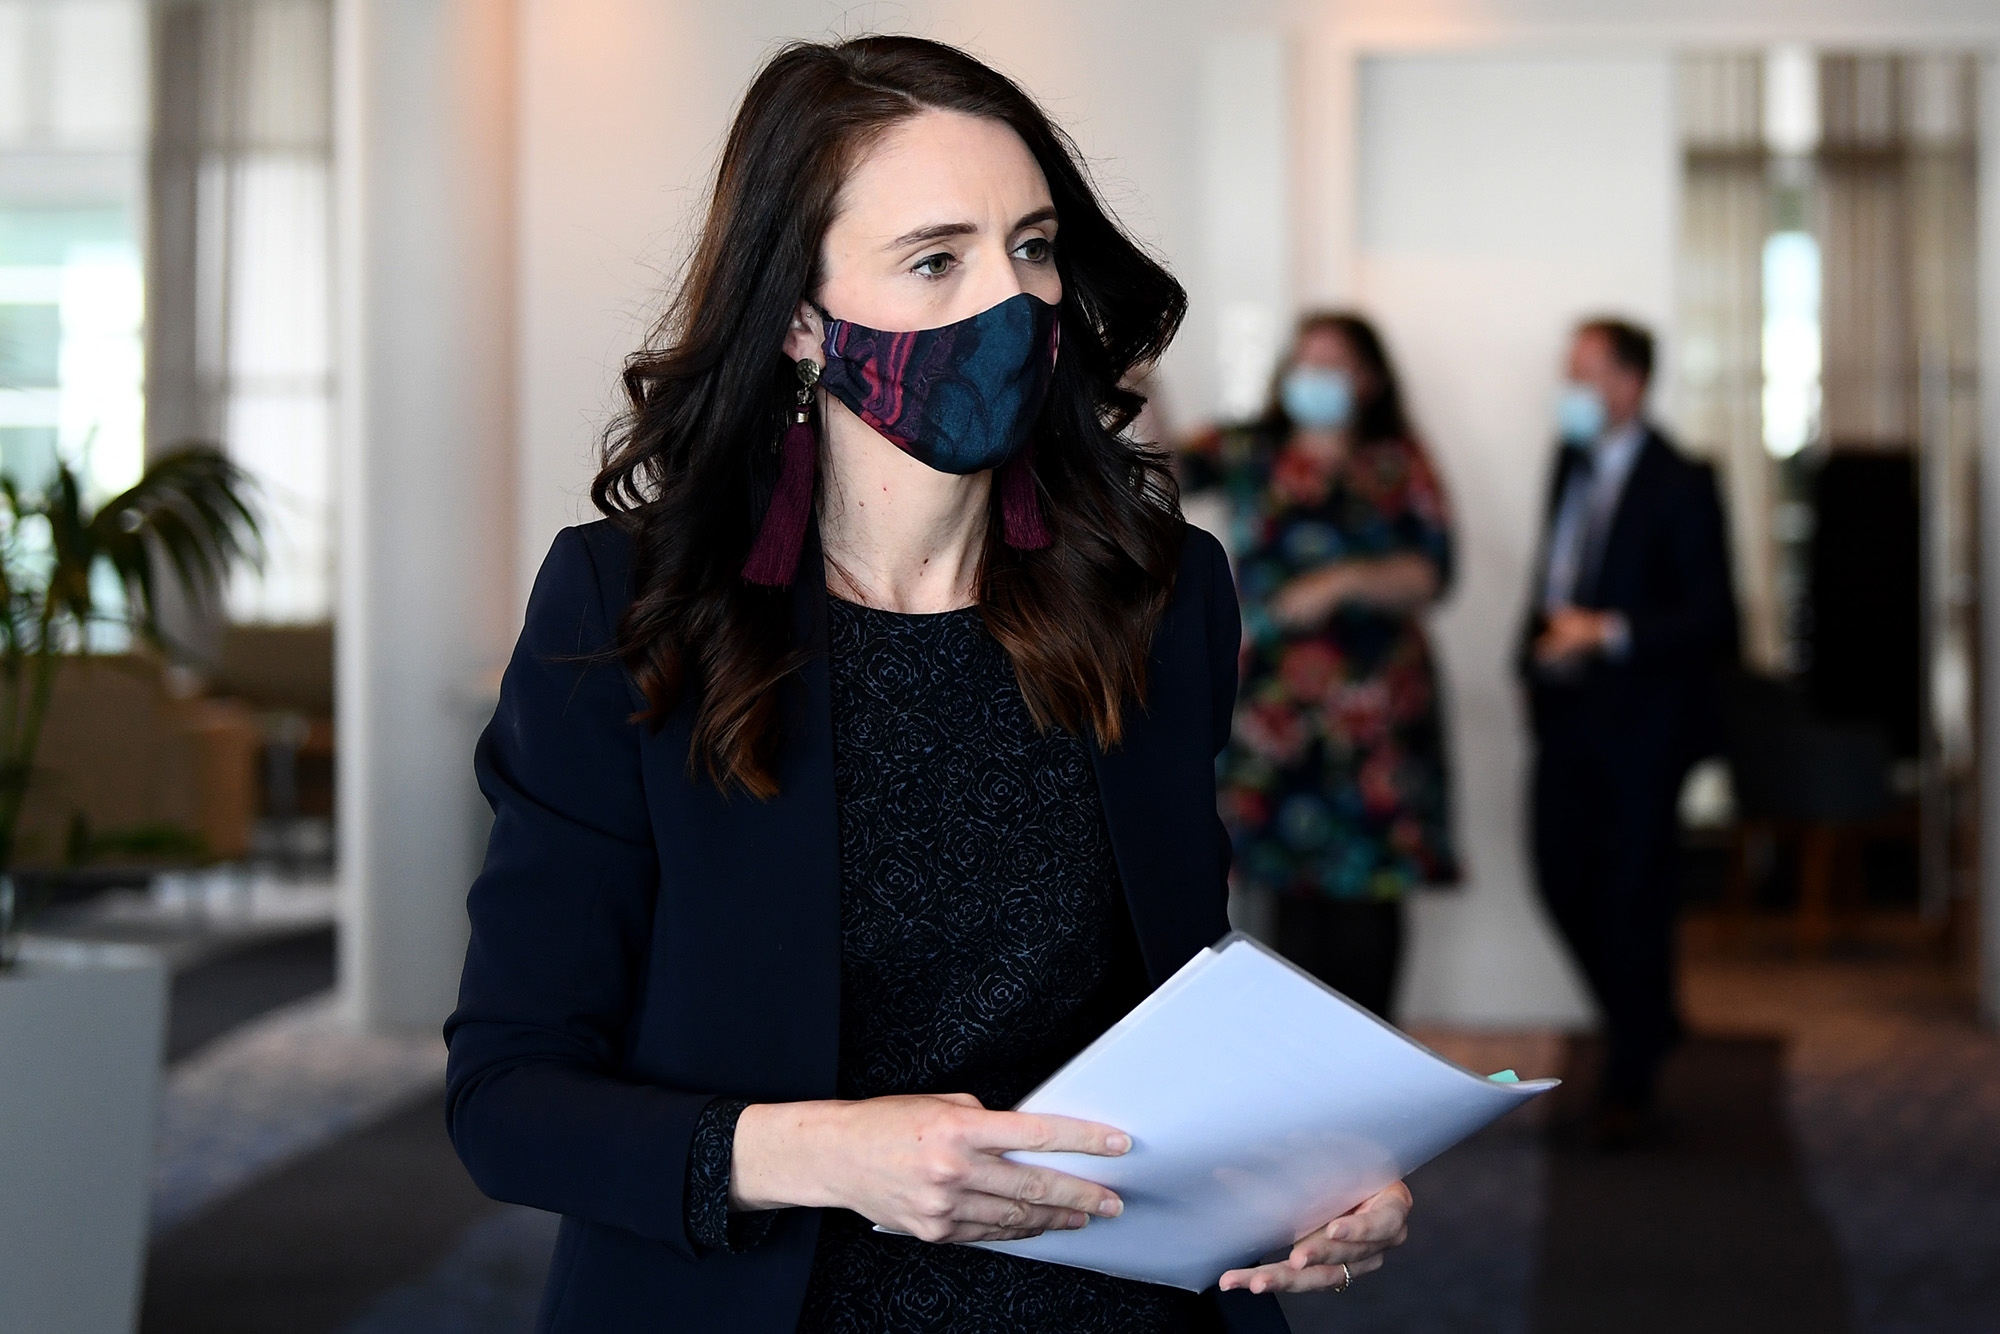 New Zealand Prime Minister Jacinda Ardern arrives to speak at the Business NZ Election Conference on September 11, in Auckland, New Zealand. 